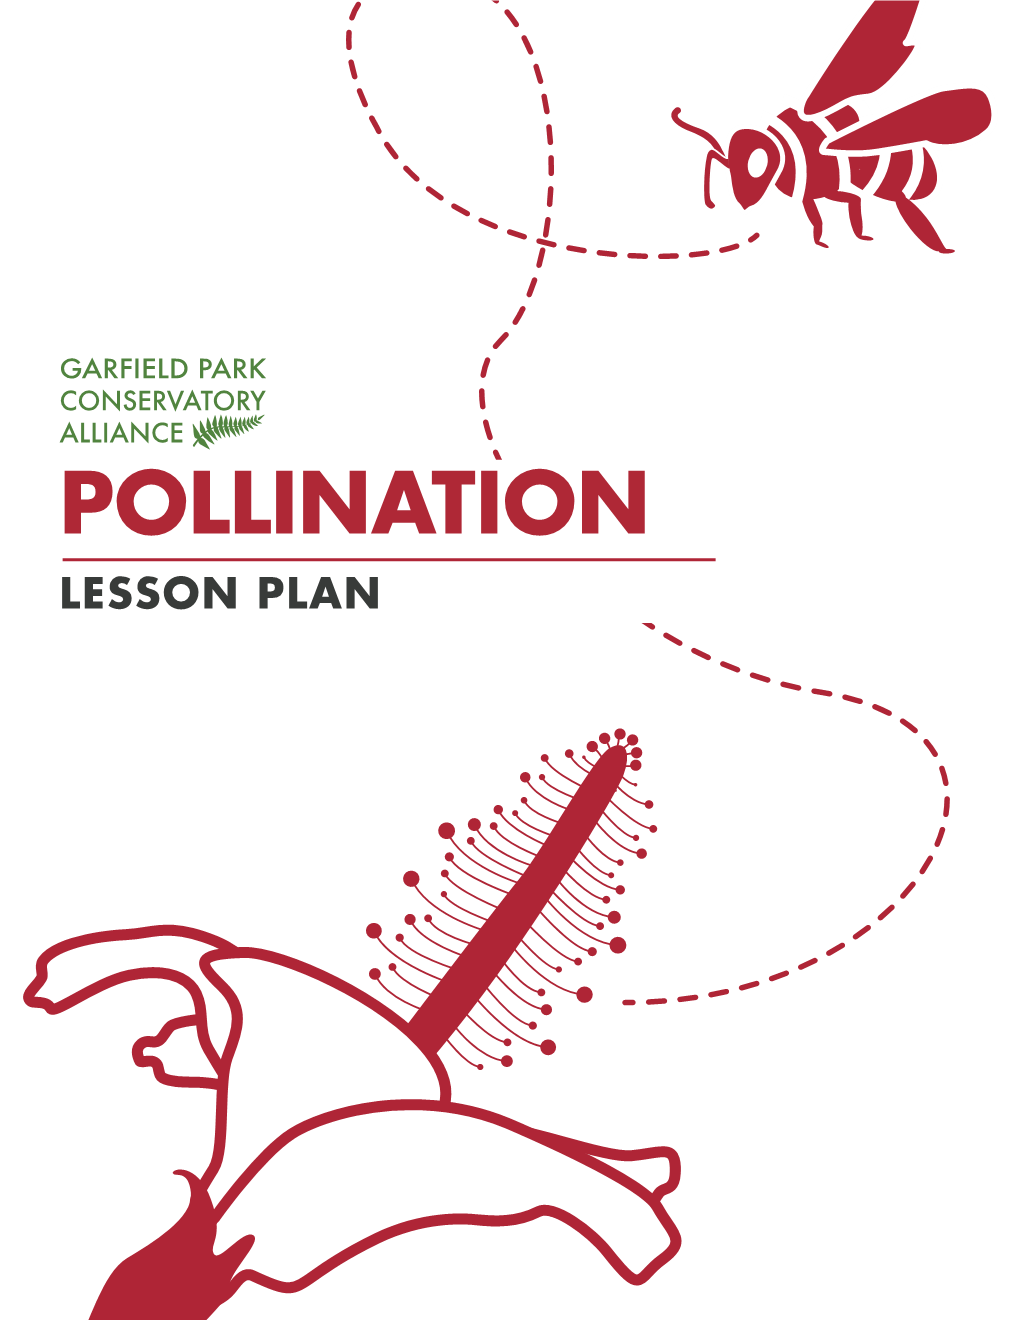 GARFIELD PARK CONSERVATORY ALLIANCE POLLINATION LESSON PLAN the Birds and the Bees